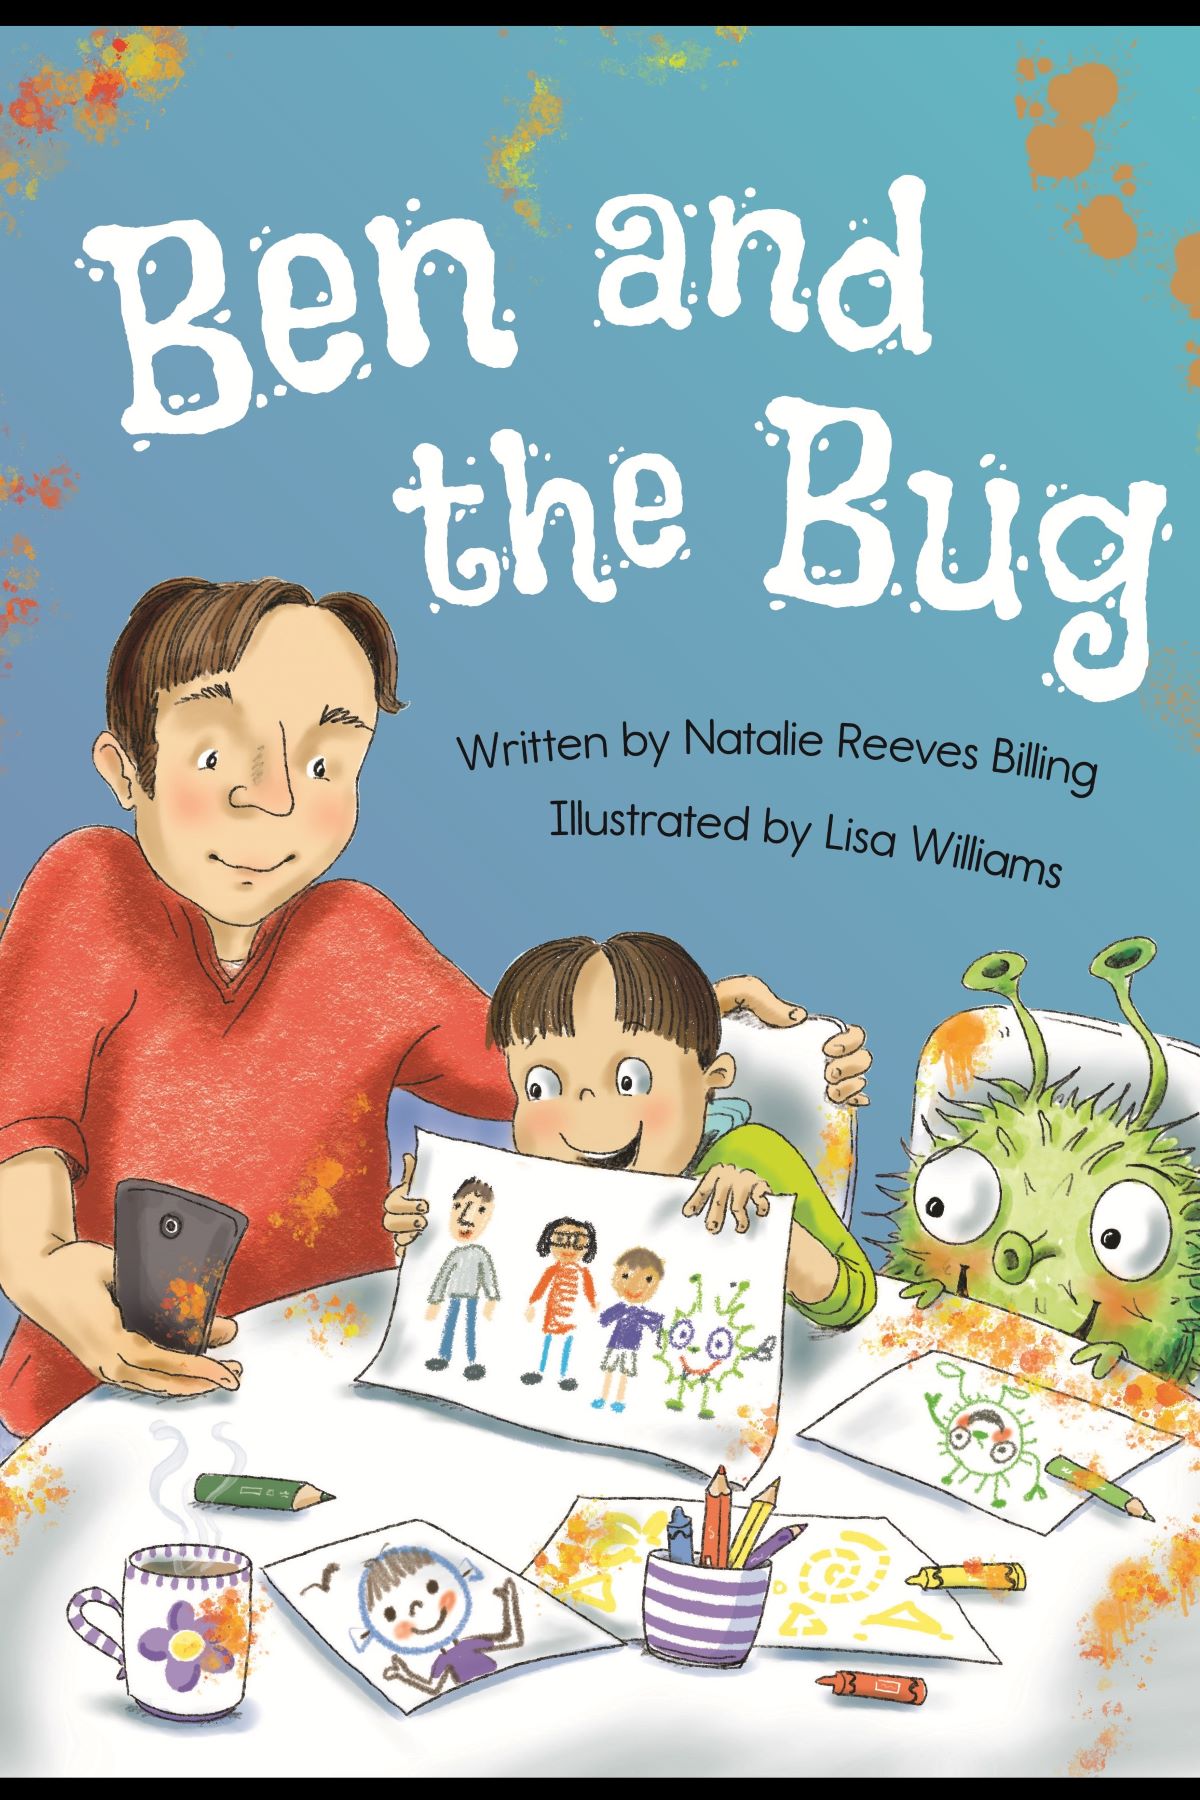 Book Review: Ben and the Bug by Natalie Reeves-Billing